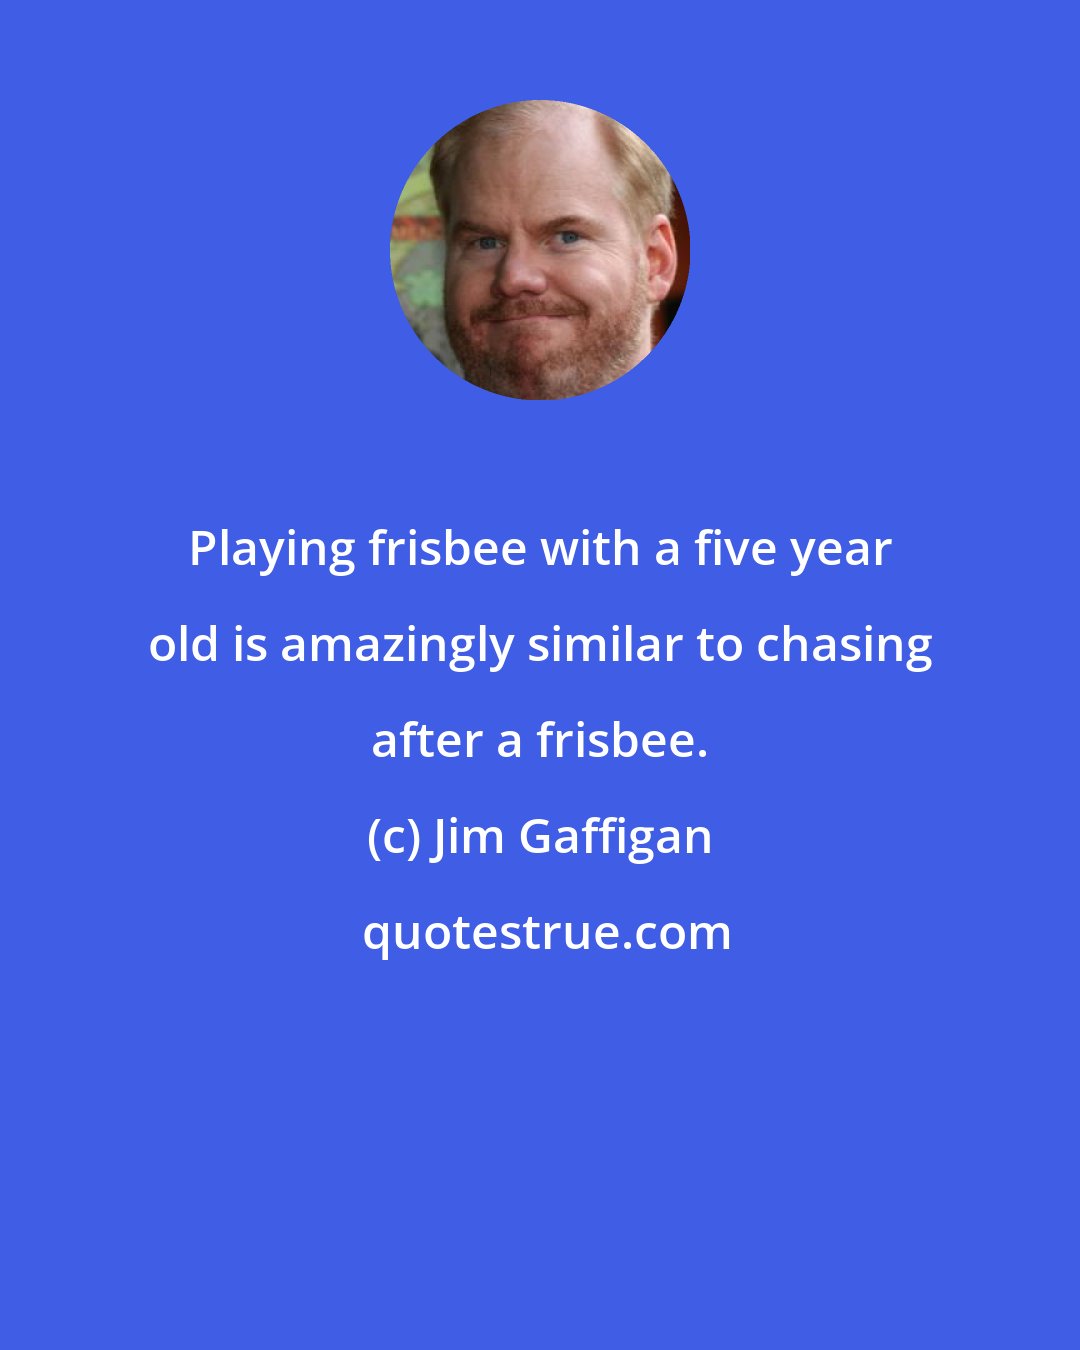 Jim Gaffigan: Playing frisbee with a five year old is amazingly similar to chasing after a frisbee.